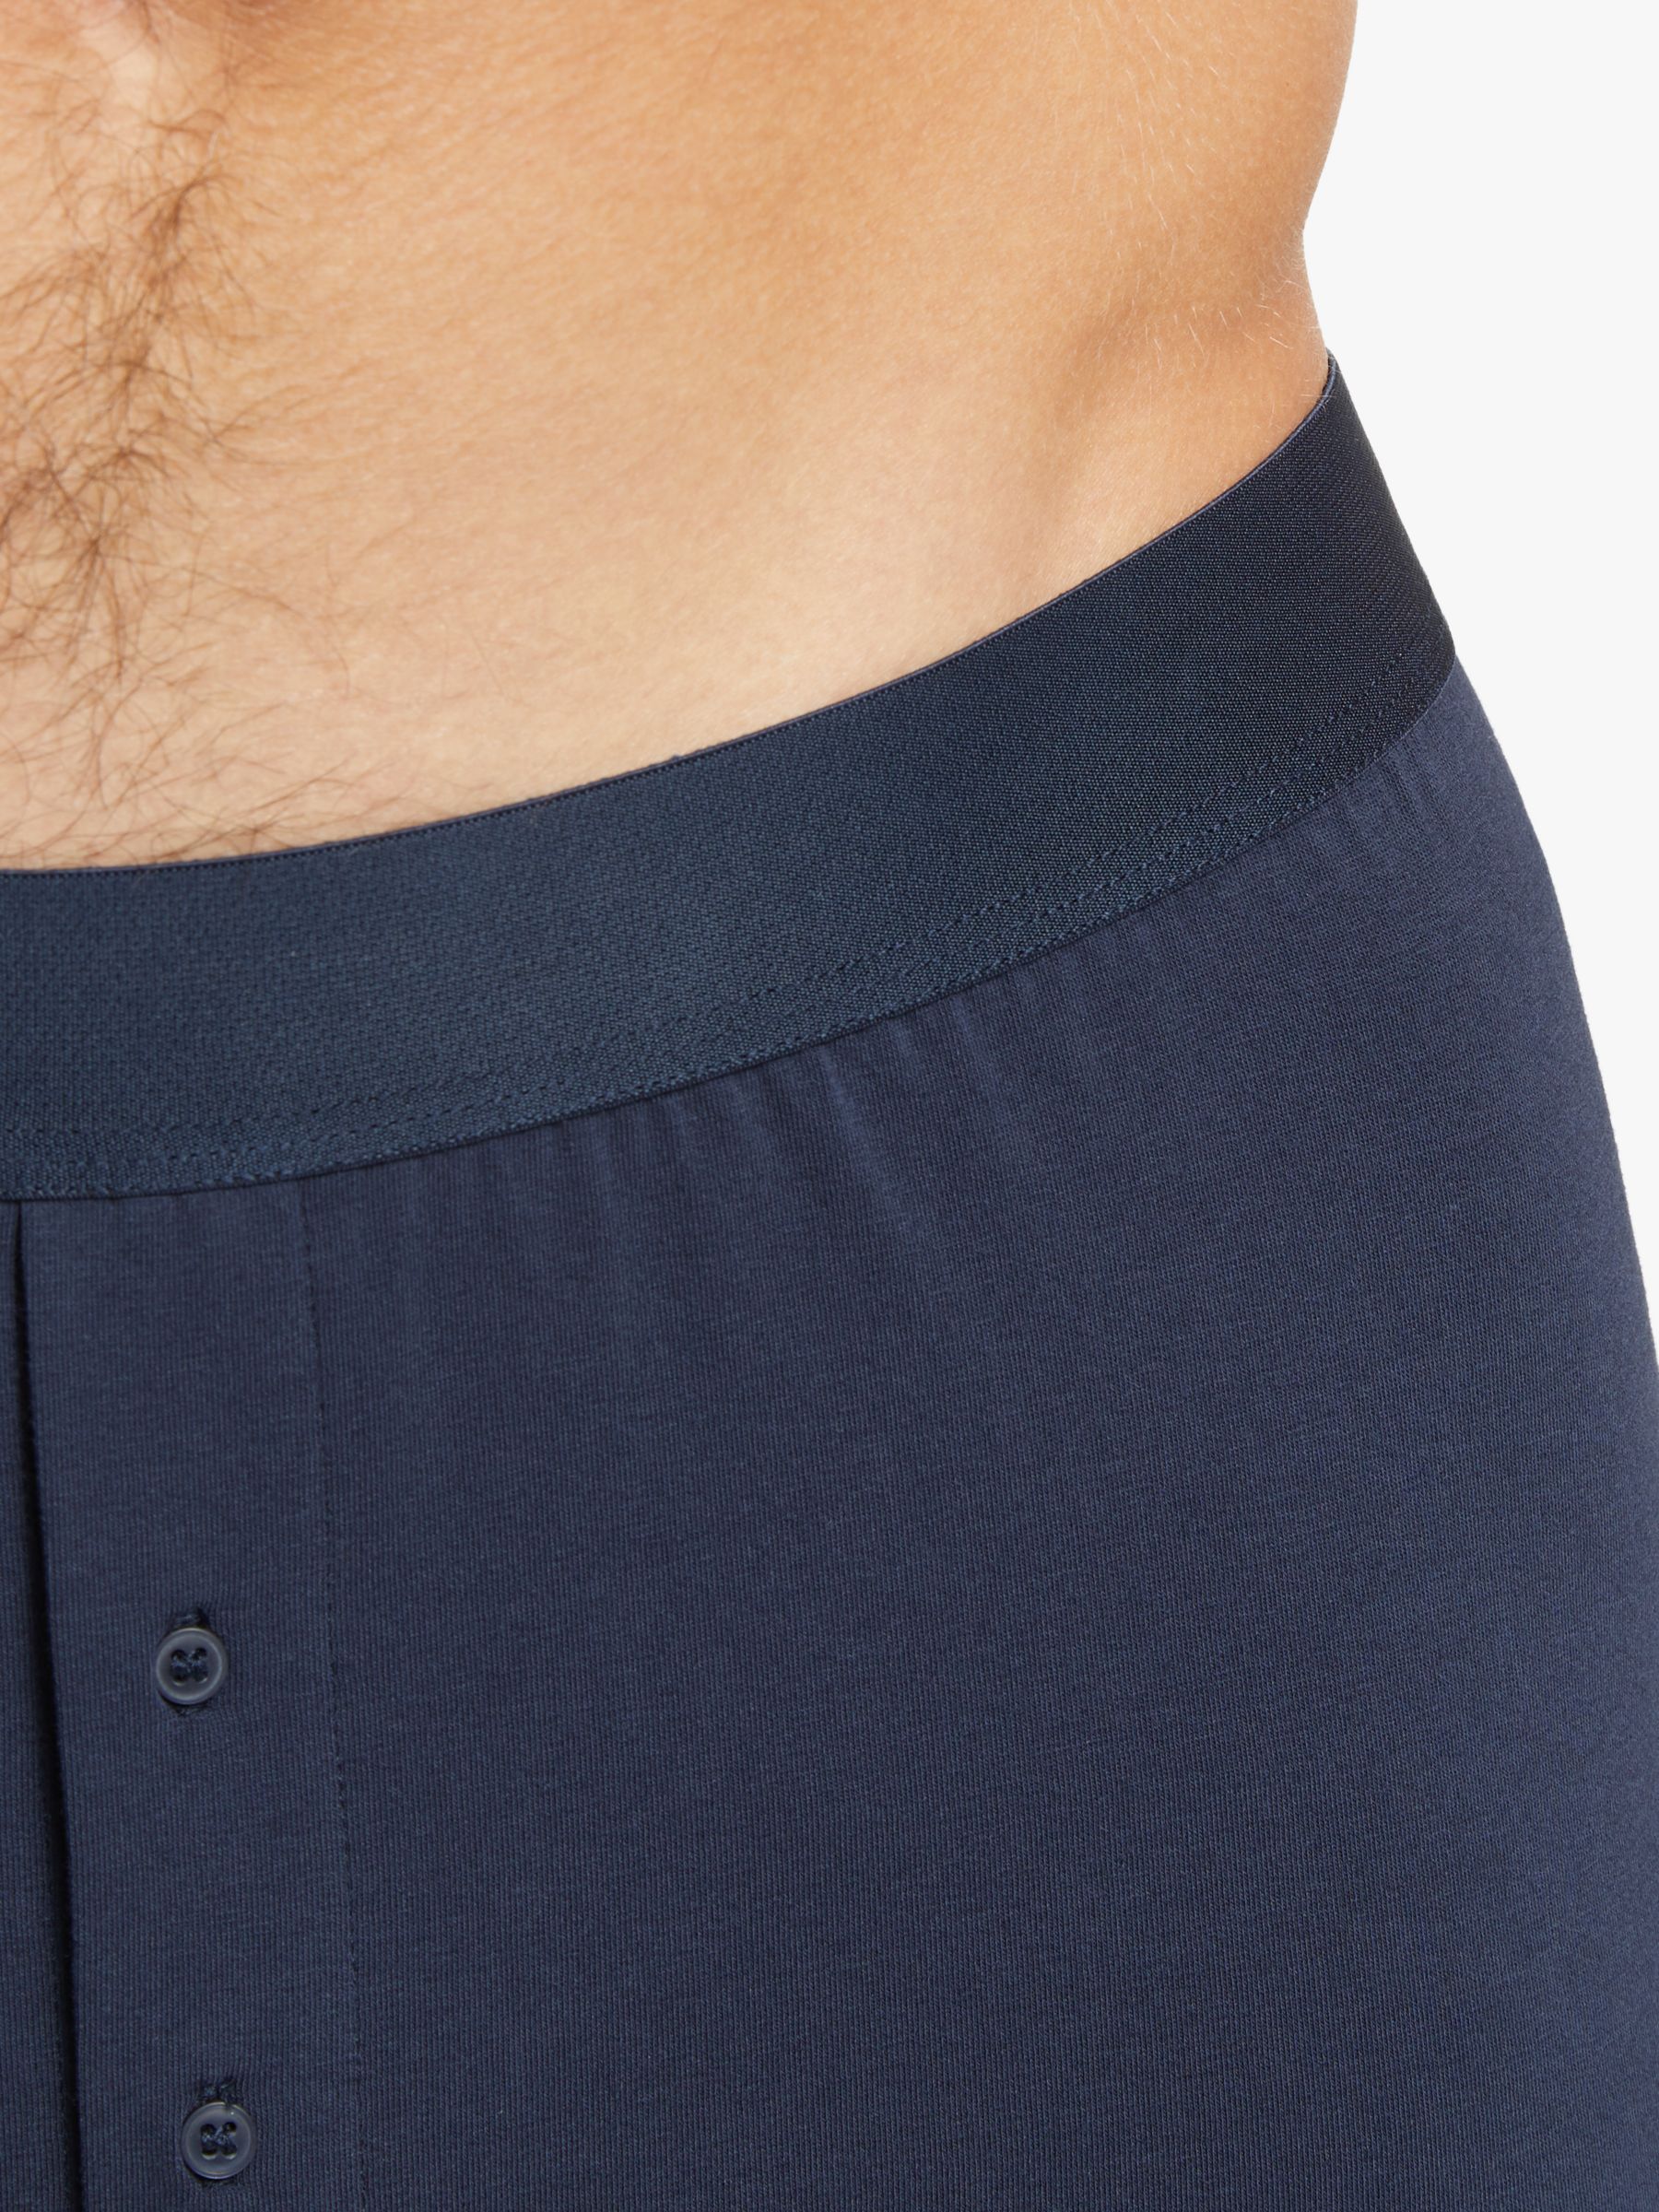 Buy John Lewis Organic Cotton Button Fly Trunks, Pack of 3 Online at johnlewis.com